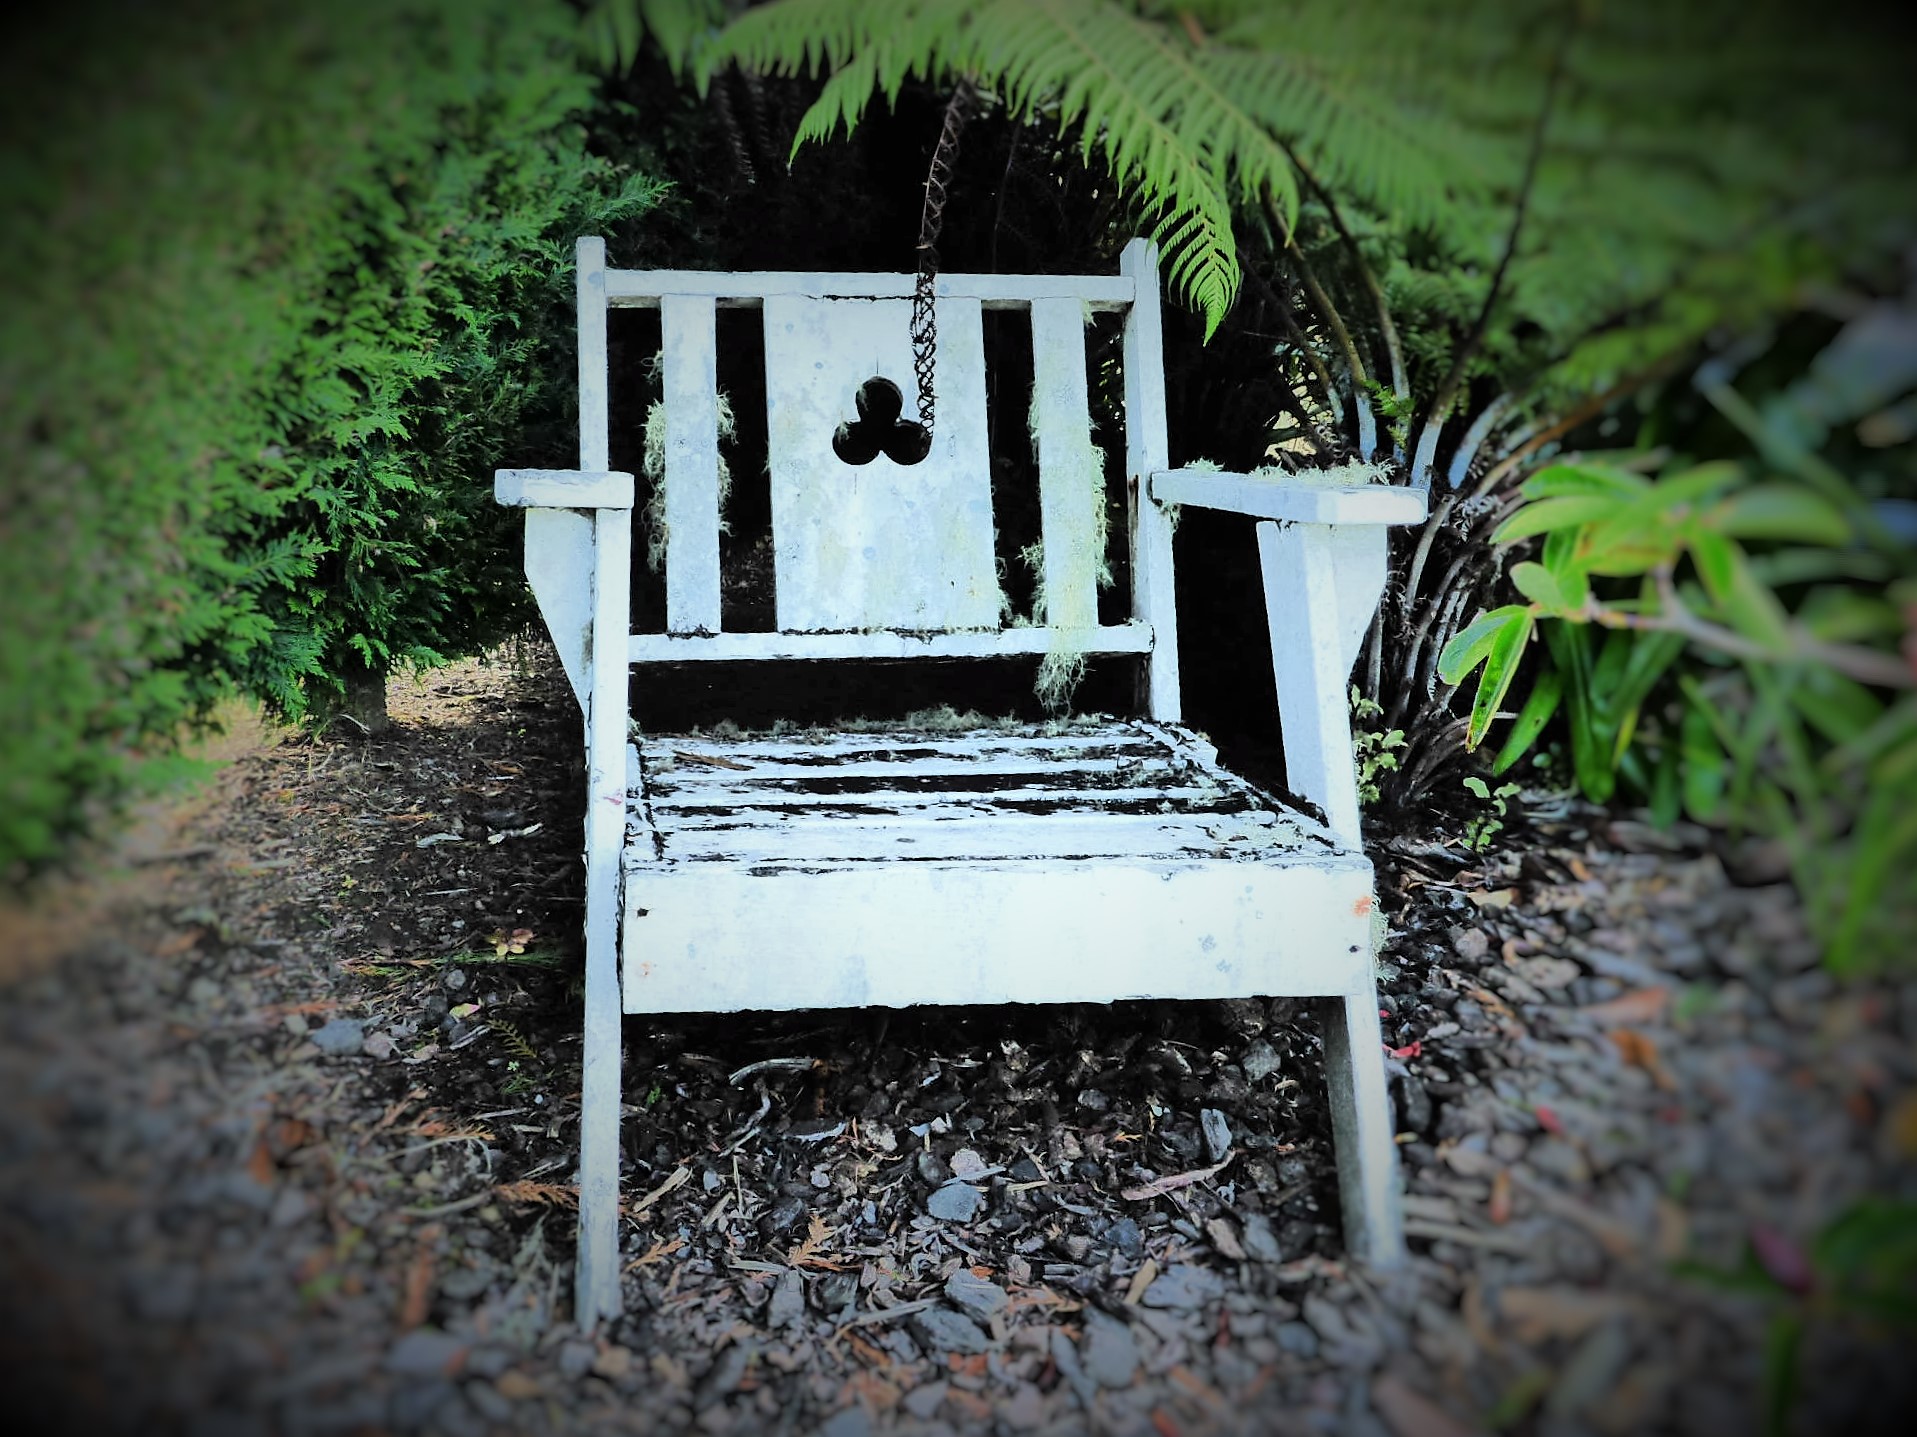 Little chair -  by Lewis & Co. Photography